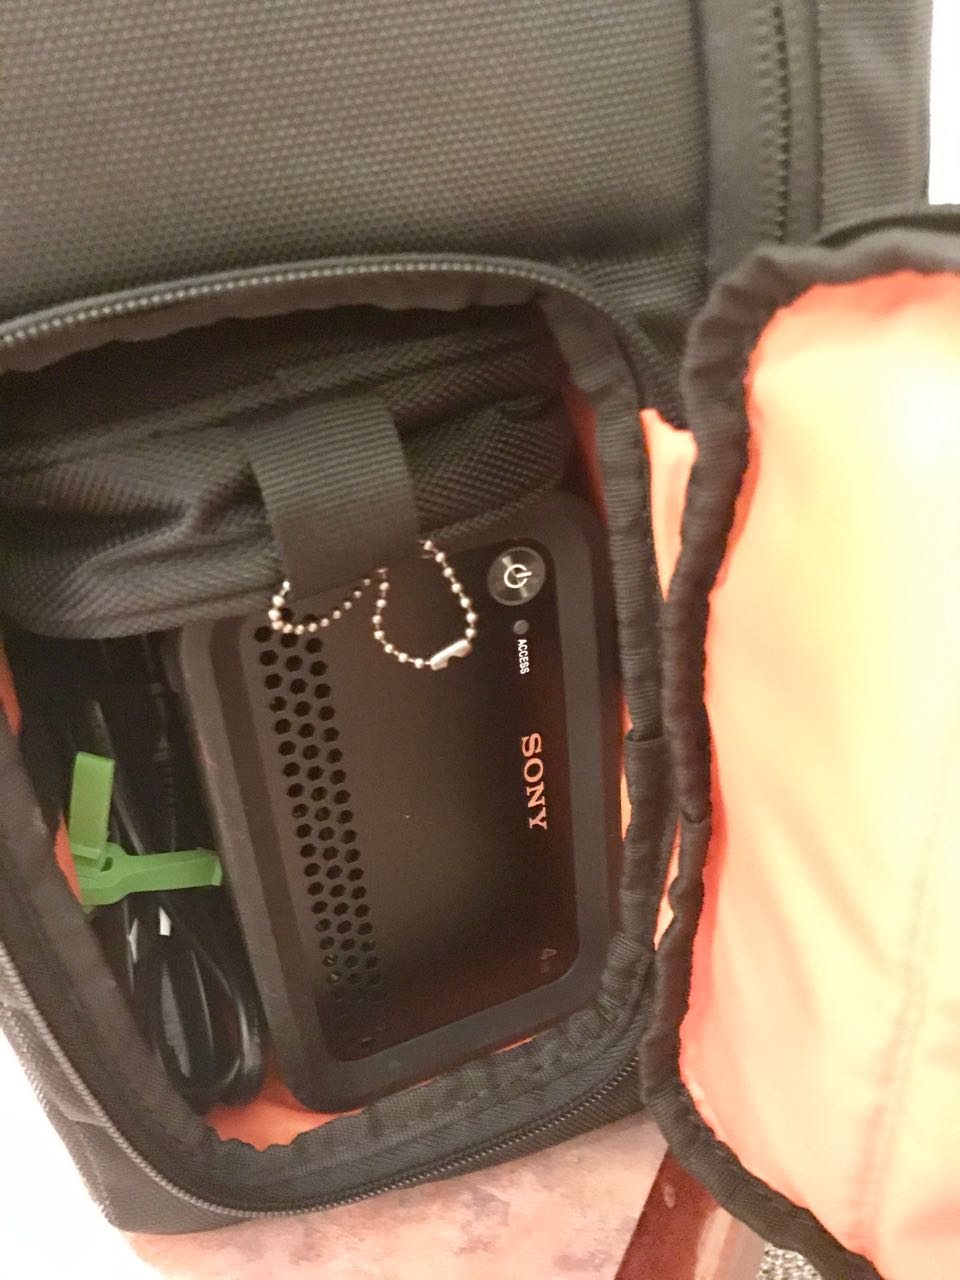 This demo unit got a lot of traveling into the couple of months that I've had it. Here it is shoved into a backpack where it logged many miles.